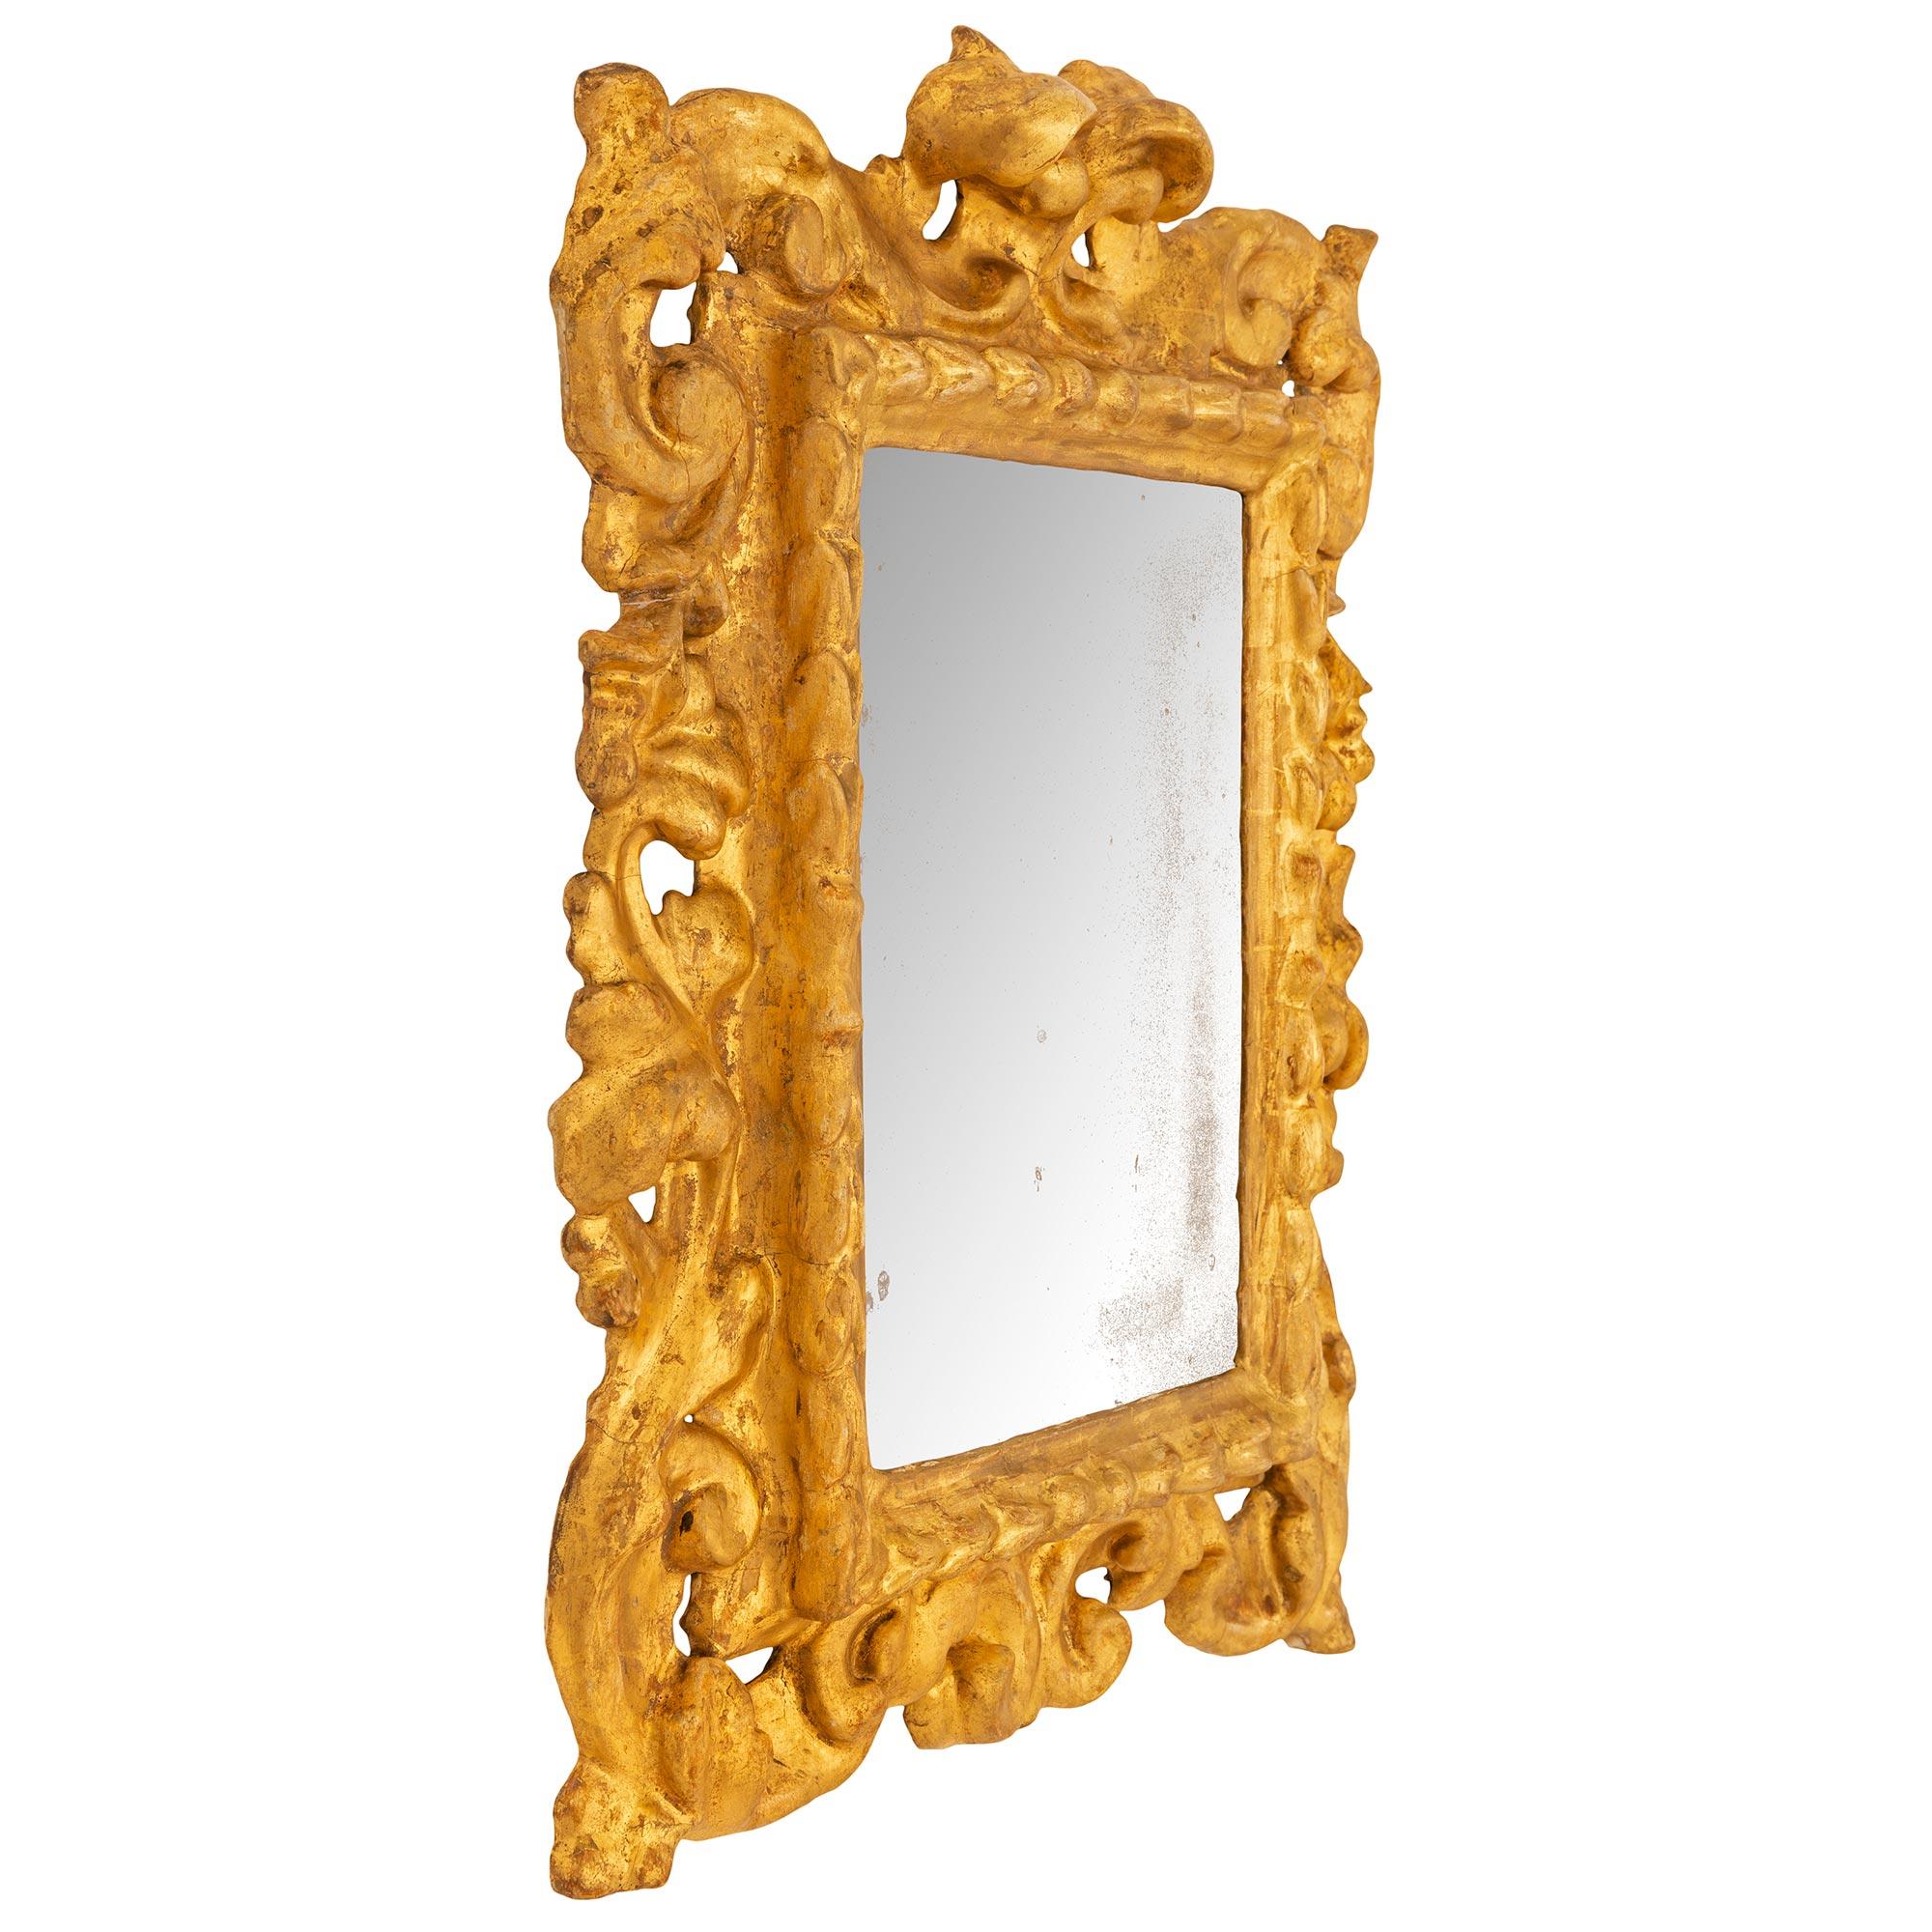 Pair of Italian Early 18th Century Baroque Period Giltwood Mirrors In Good Condition For Sale In West Palm Beach, FL